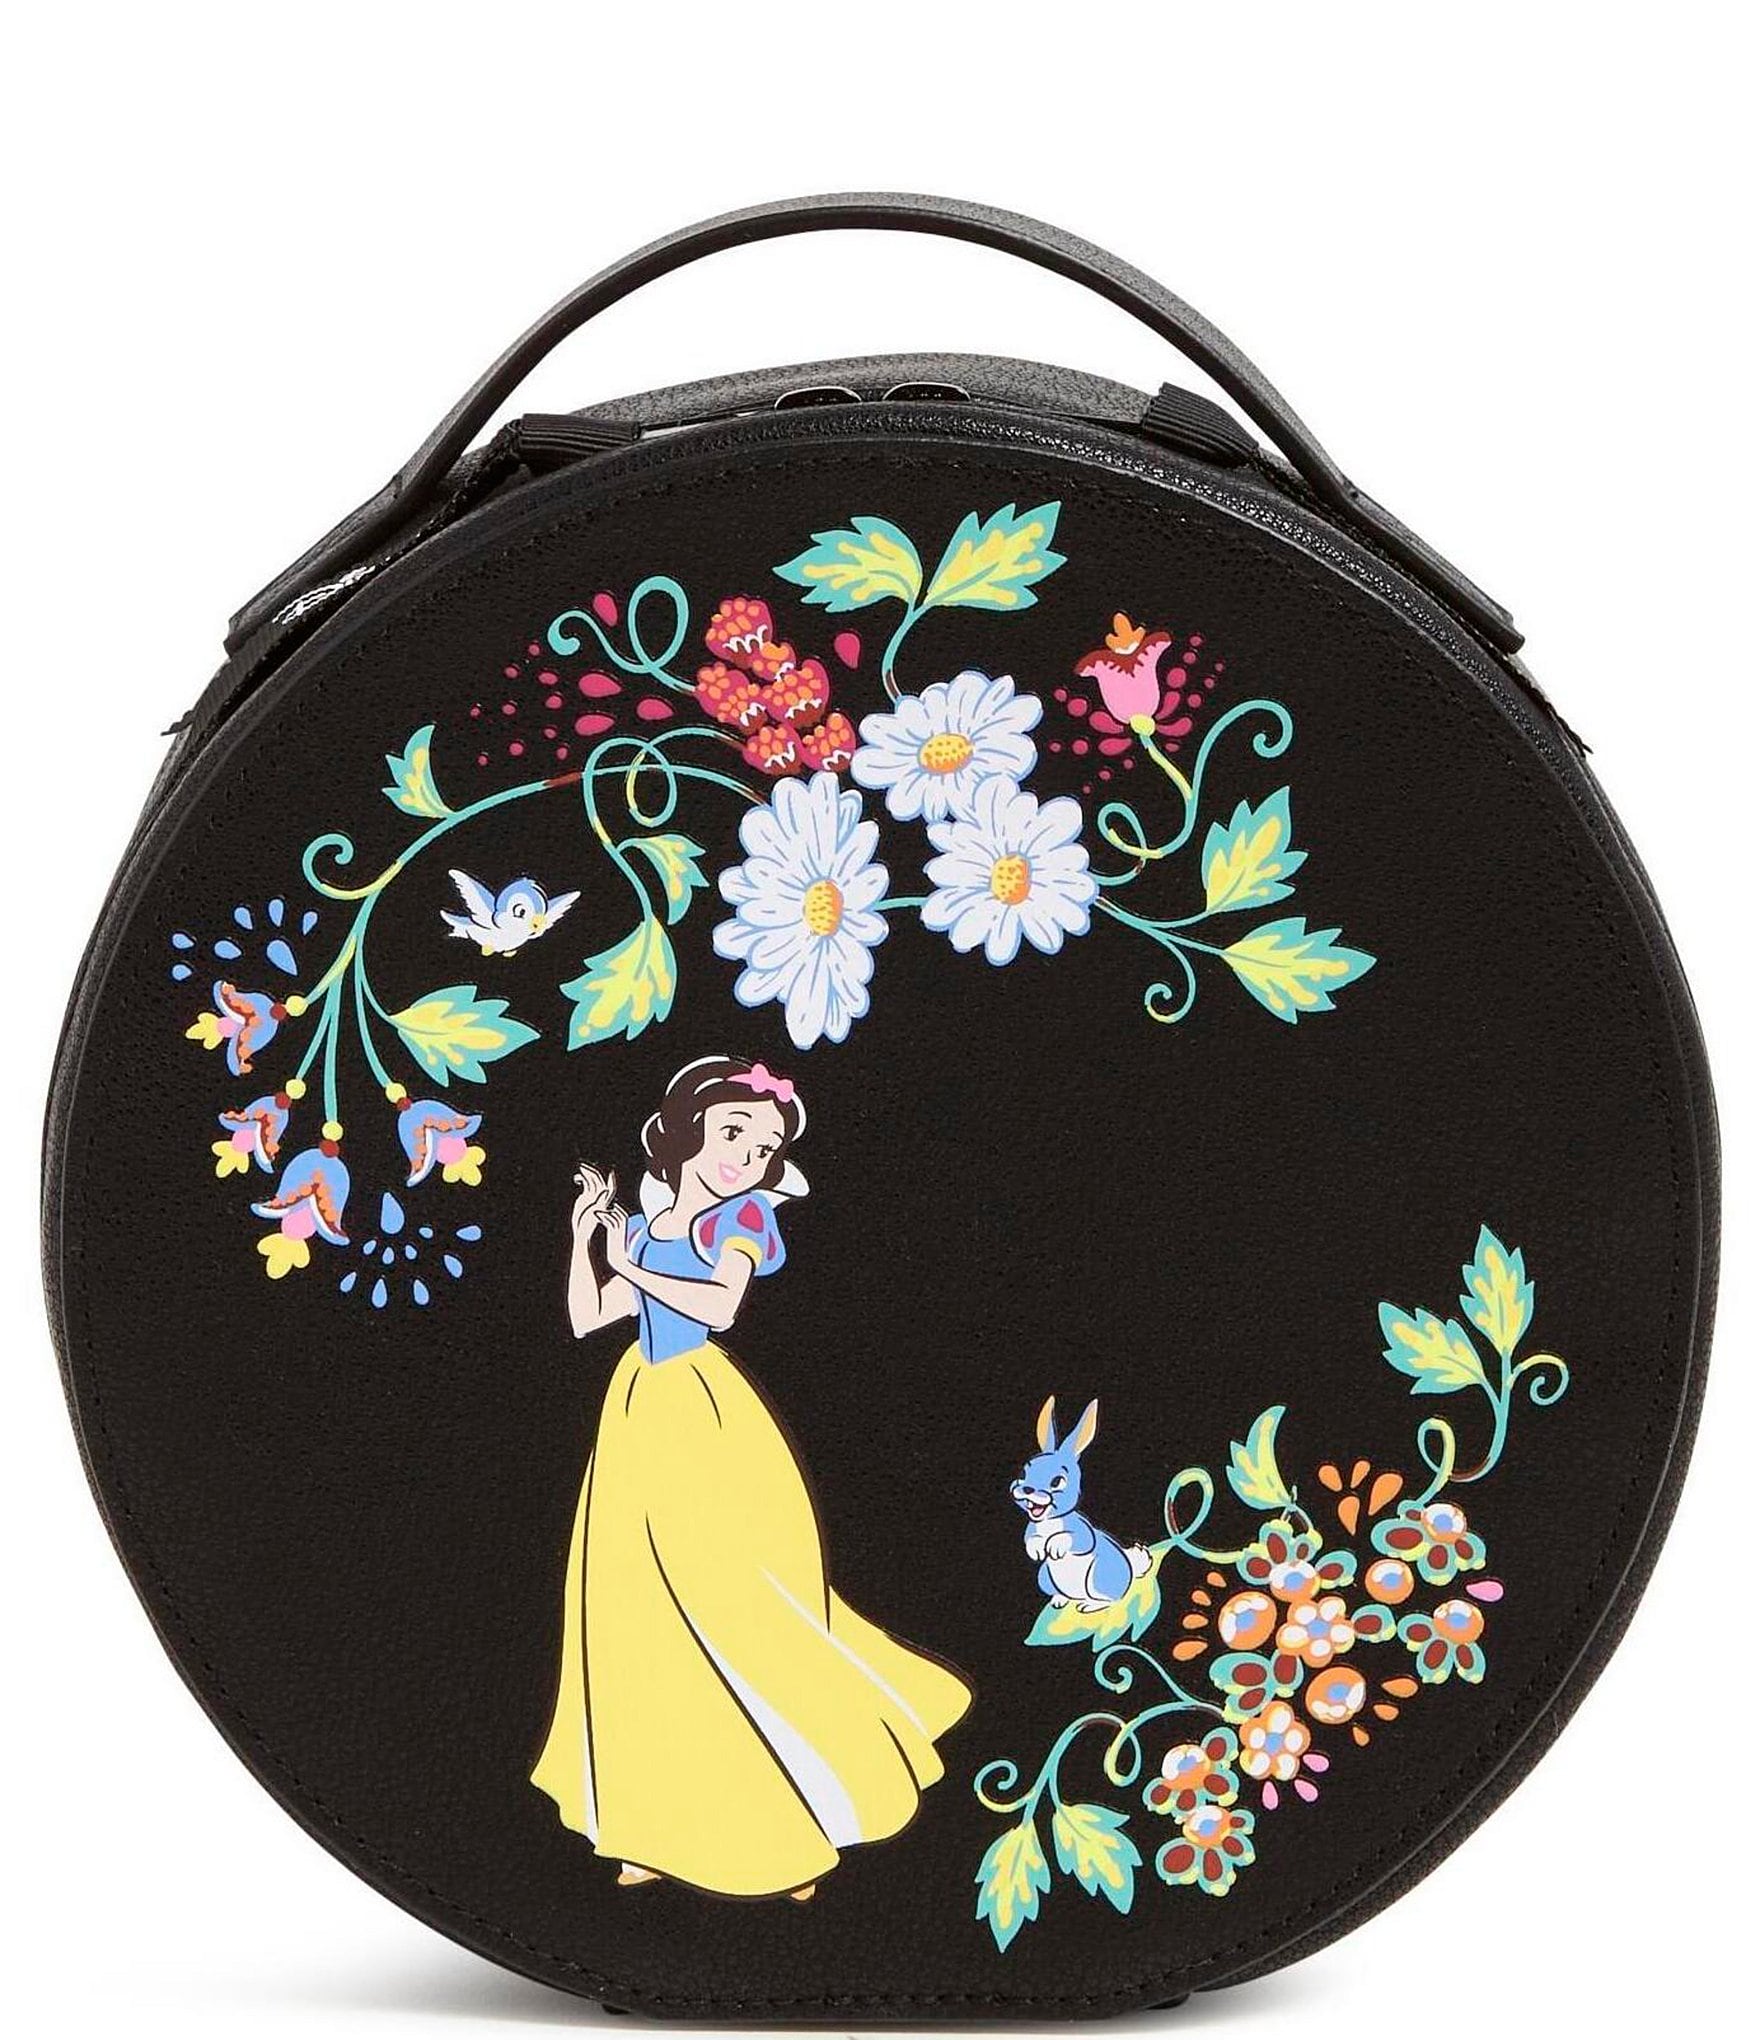 Snow White Dooney & Bourke Collection NOW at Creations Shop in EPCOT -  MickeyBlog.com